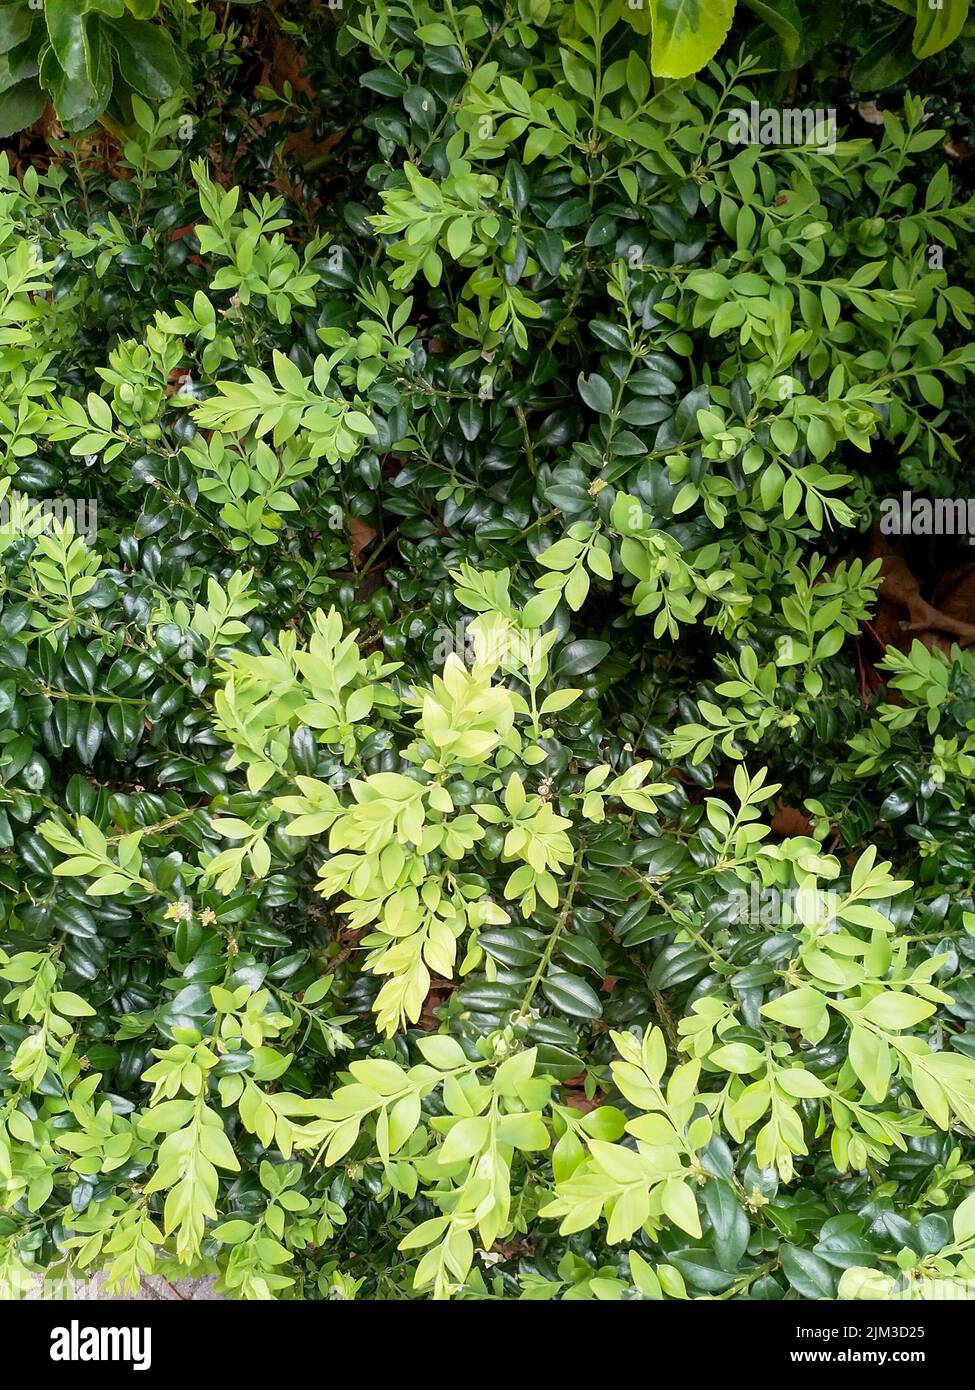 A beautiful little bush with leaves of different shades of green. Decorative garden plant. Stock Photo